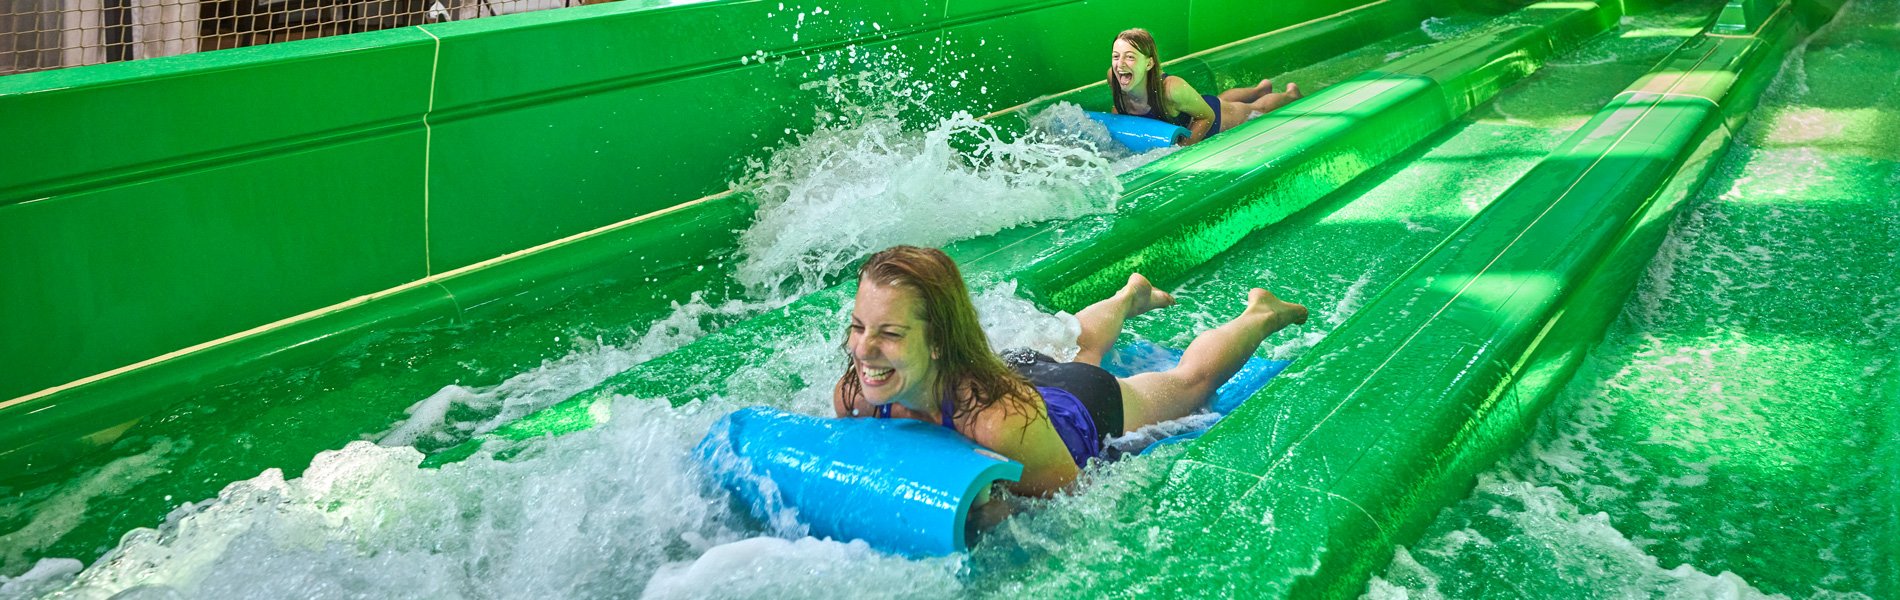 two girl friends going down a green water park slide